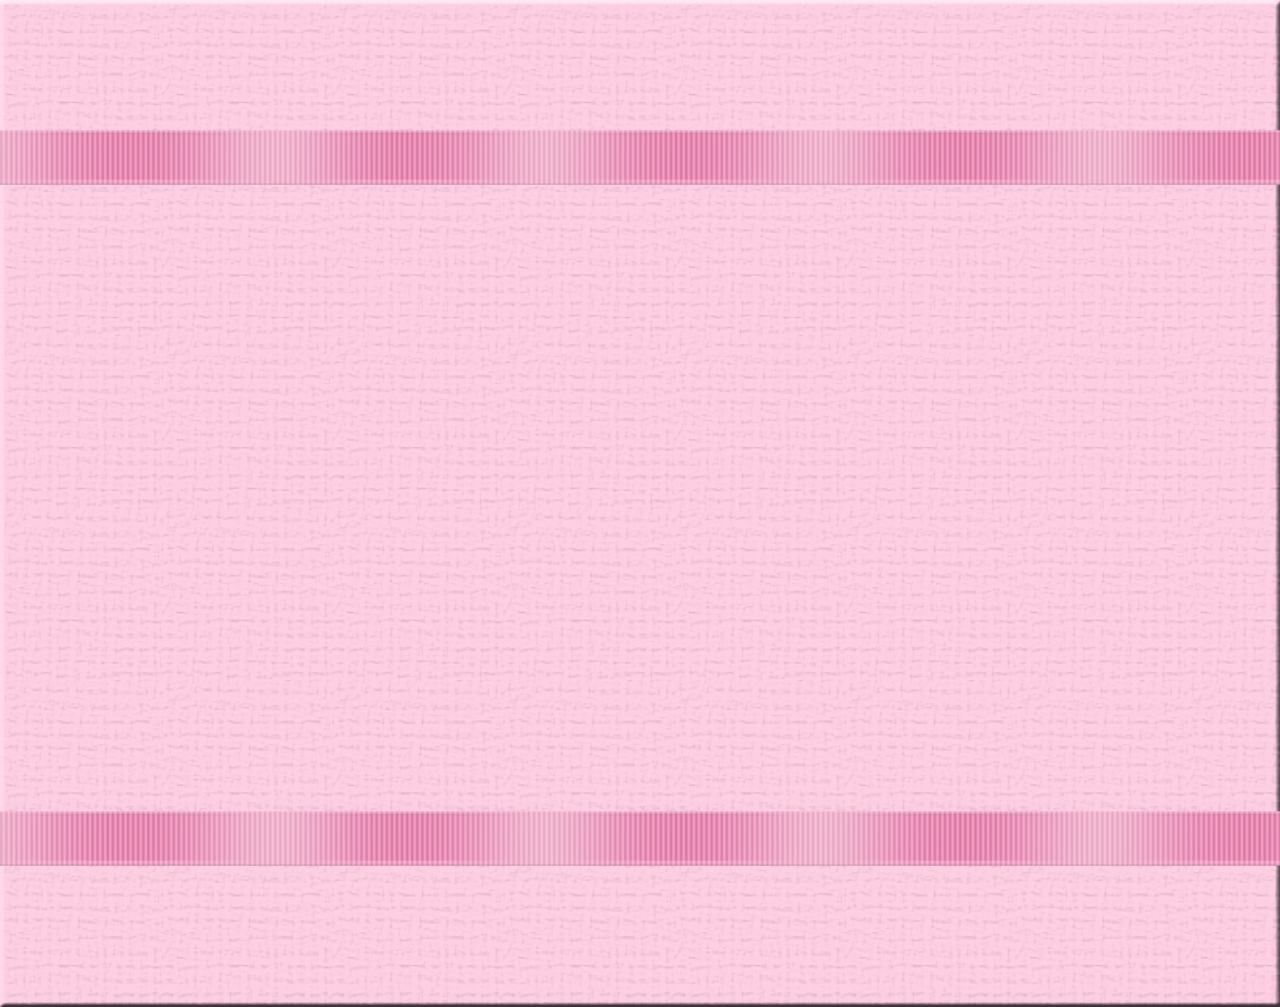 Breast Cancer Ribbon Background Use This In Your